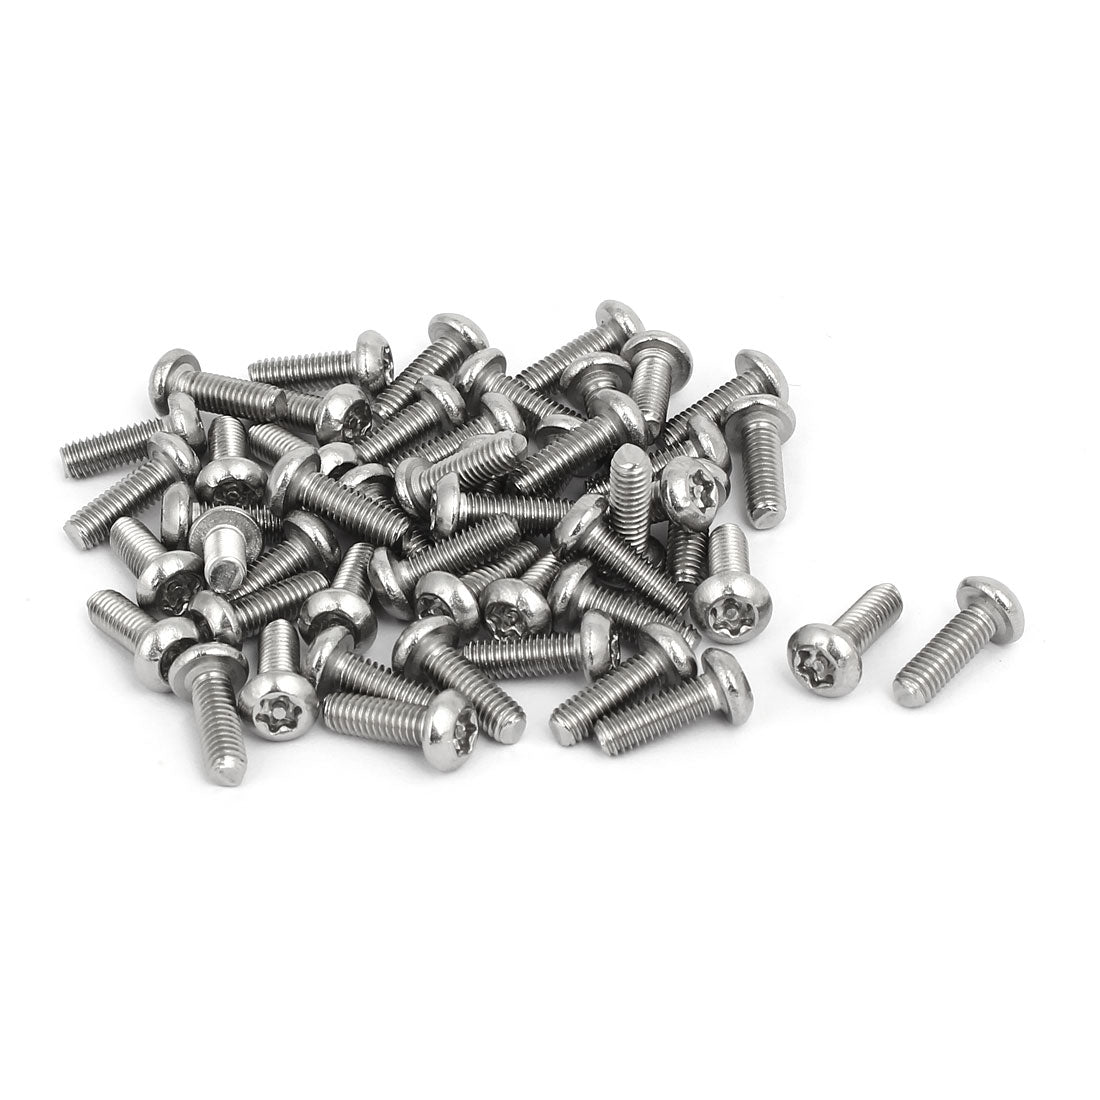 uxcell Uxcell M4x12mm 304 Stainless Steel Button Head Torx Security Tamper Proof Screws 50pcs